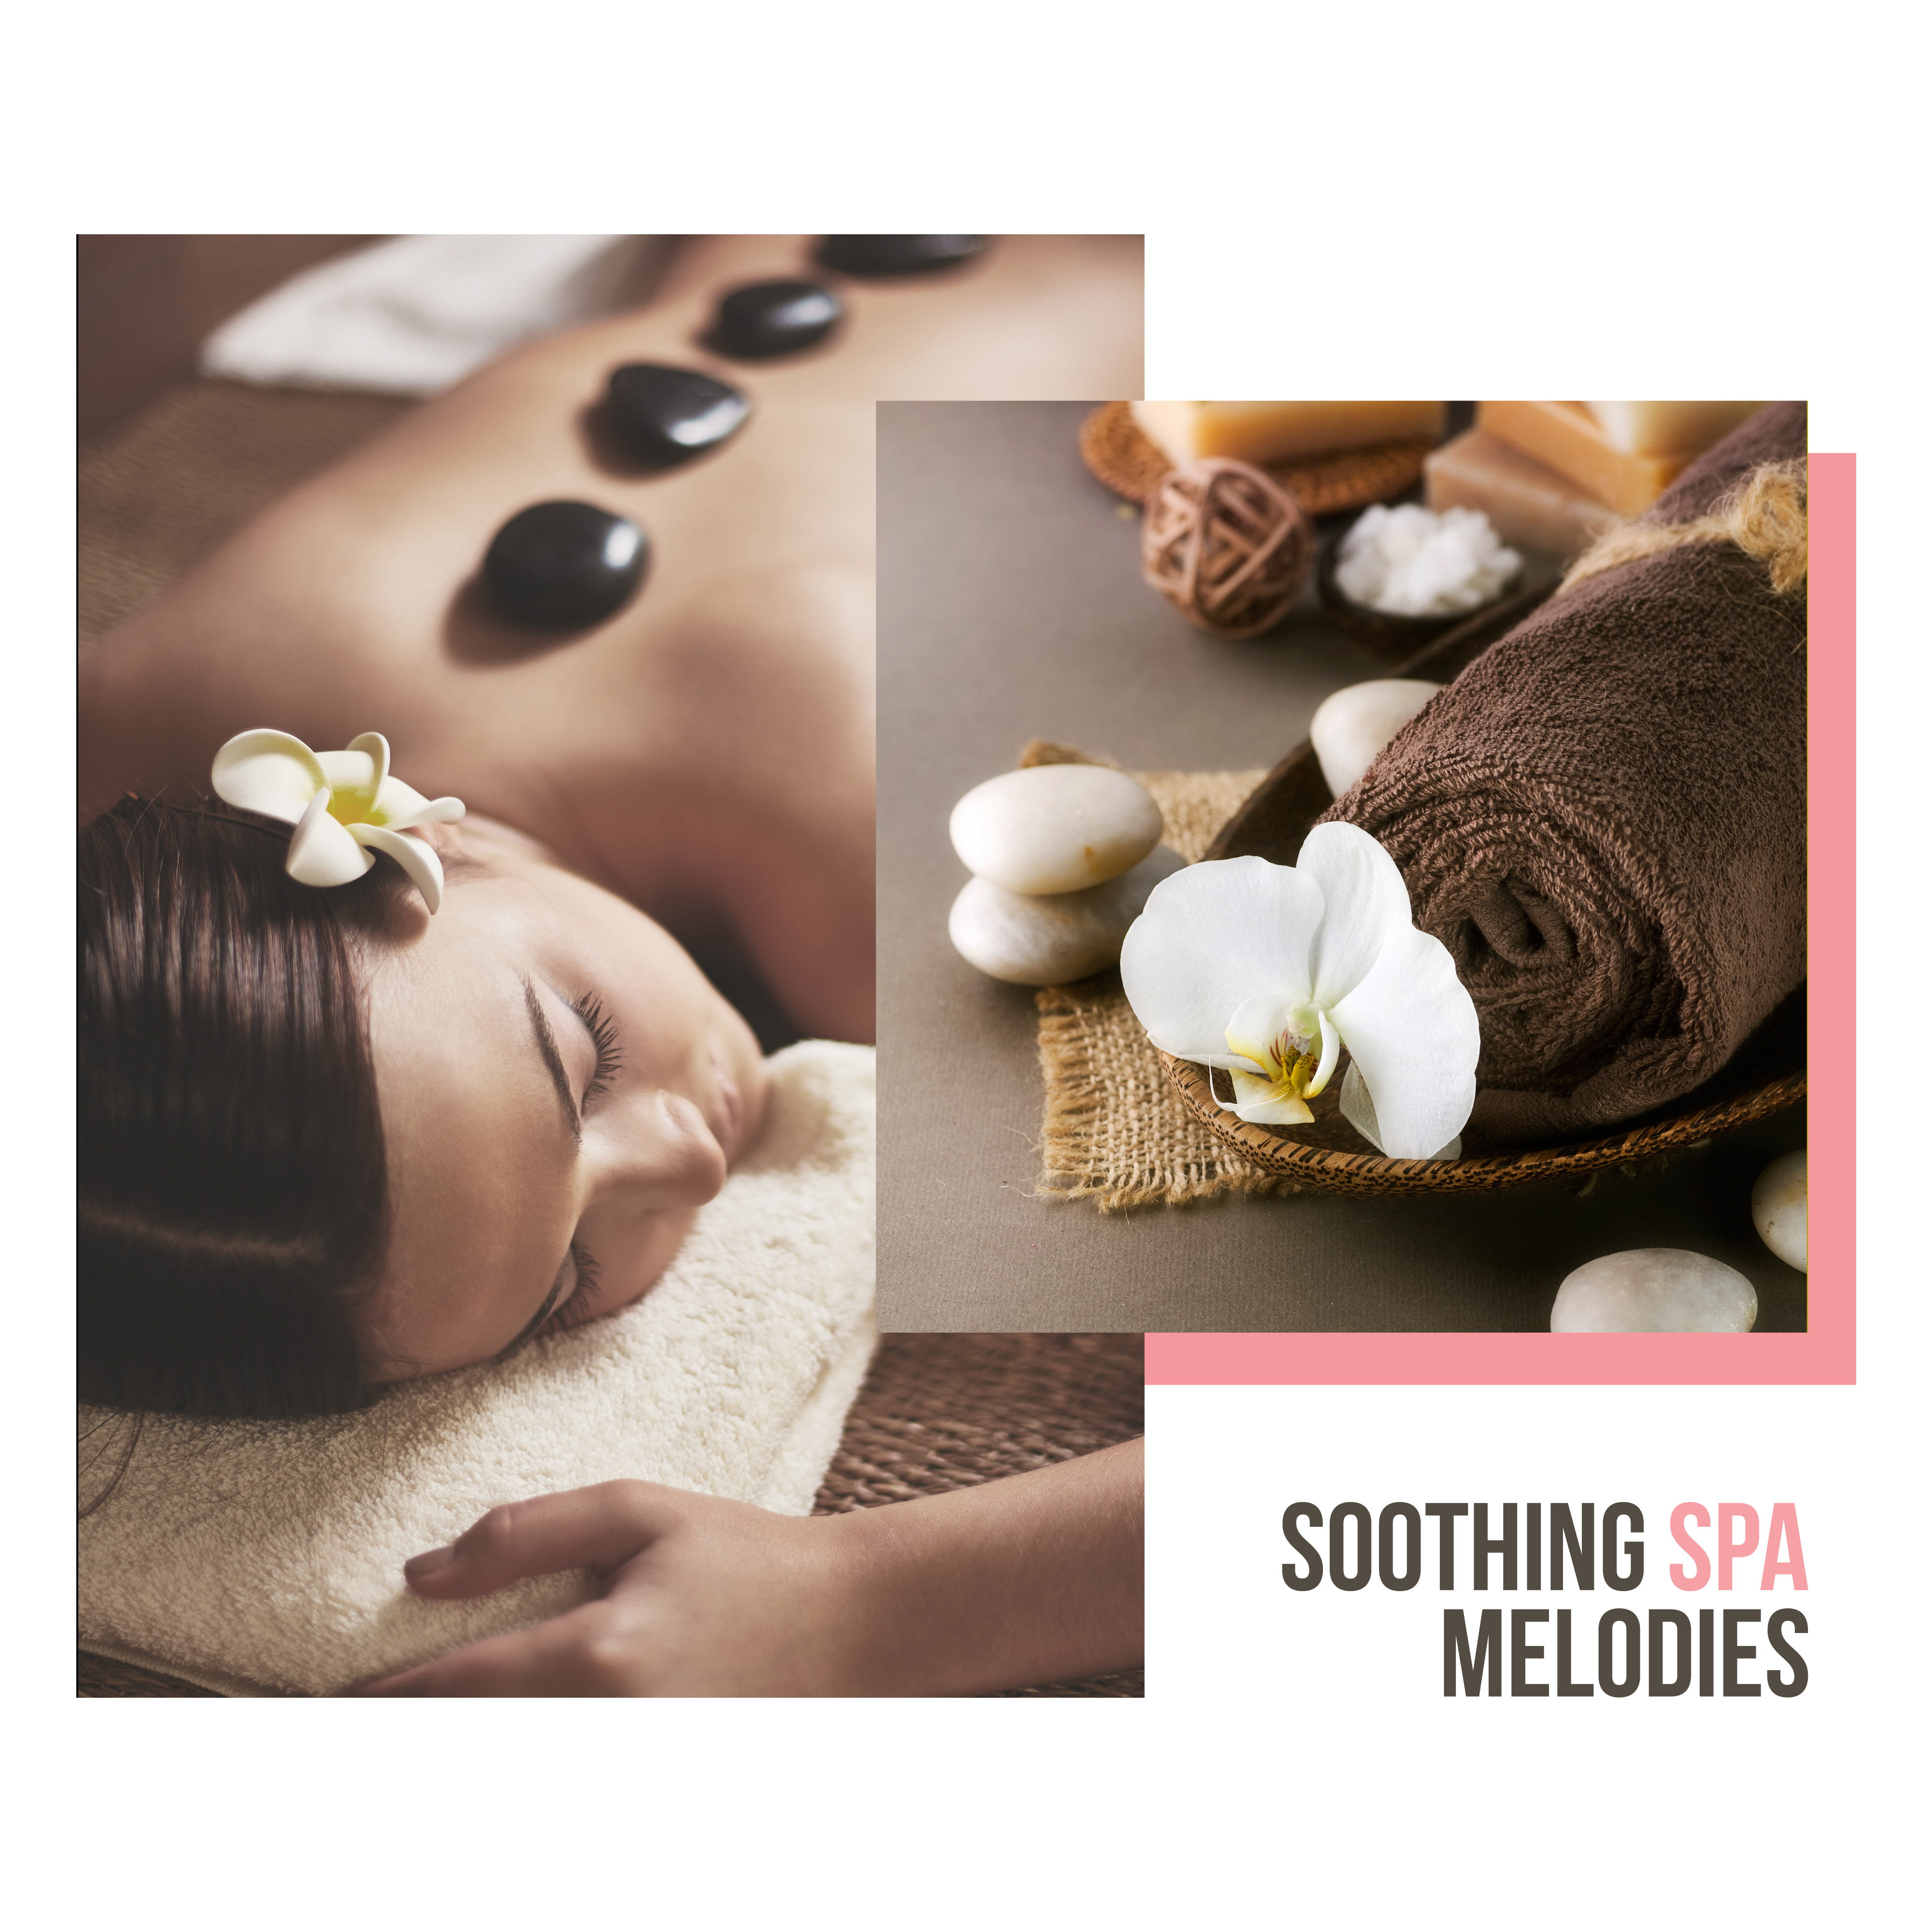 Soothing Spa Melodies